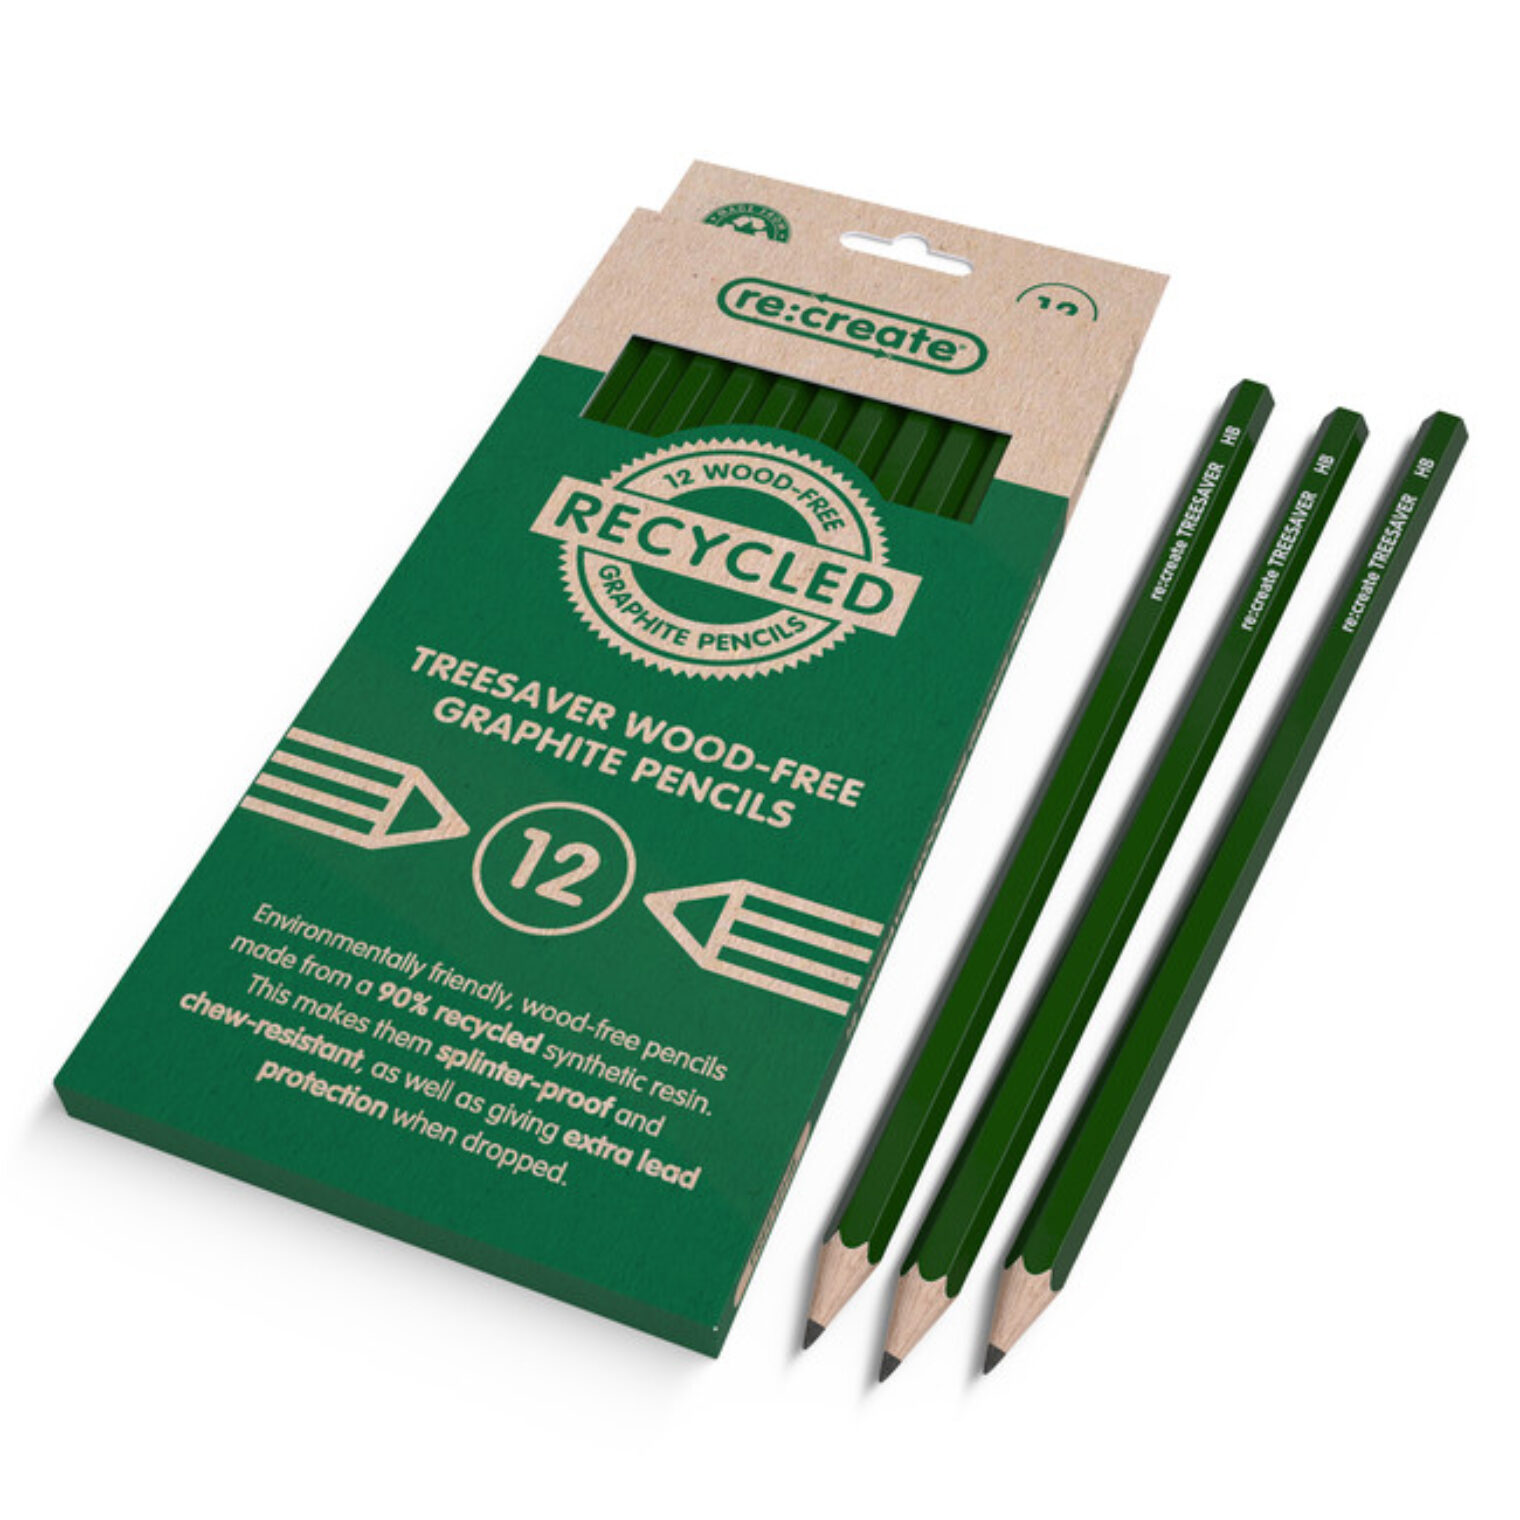 ReCreate recycled HB graphite pencils 12 pack